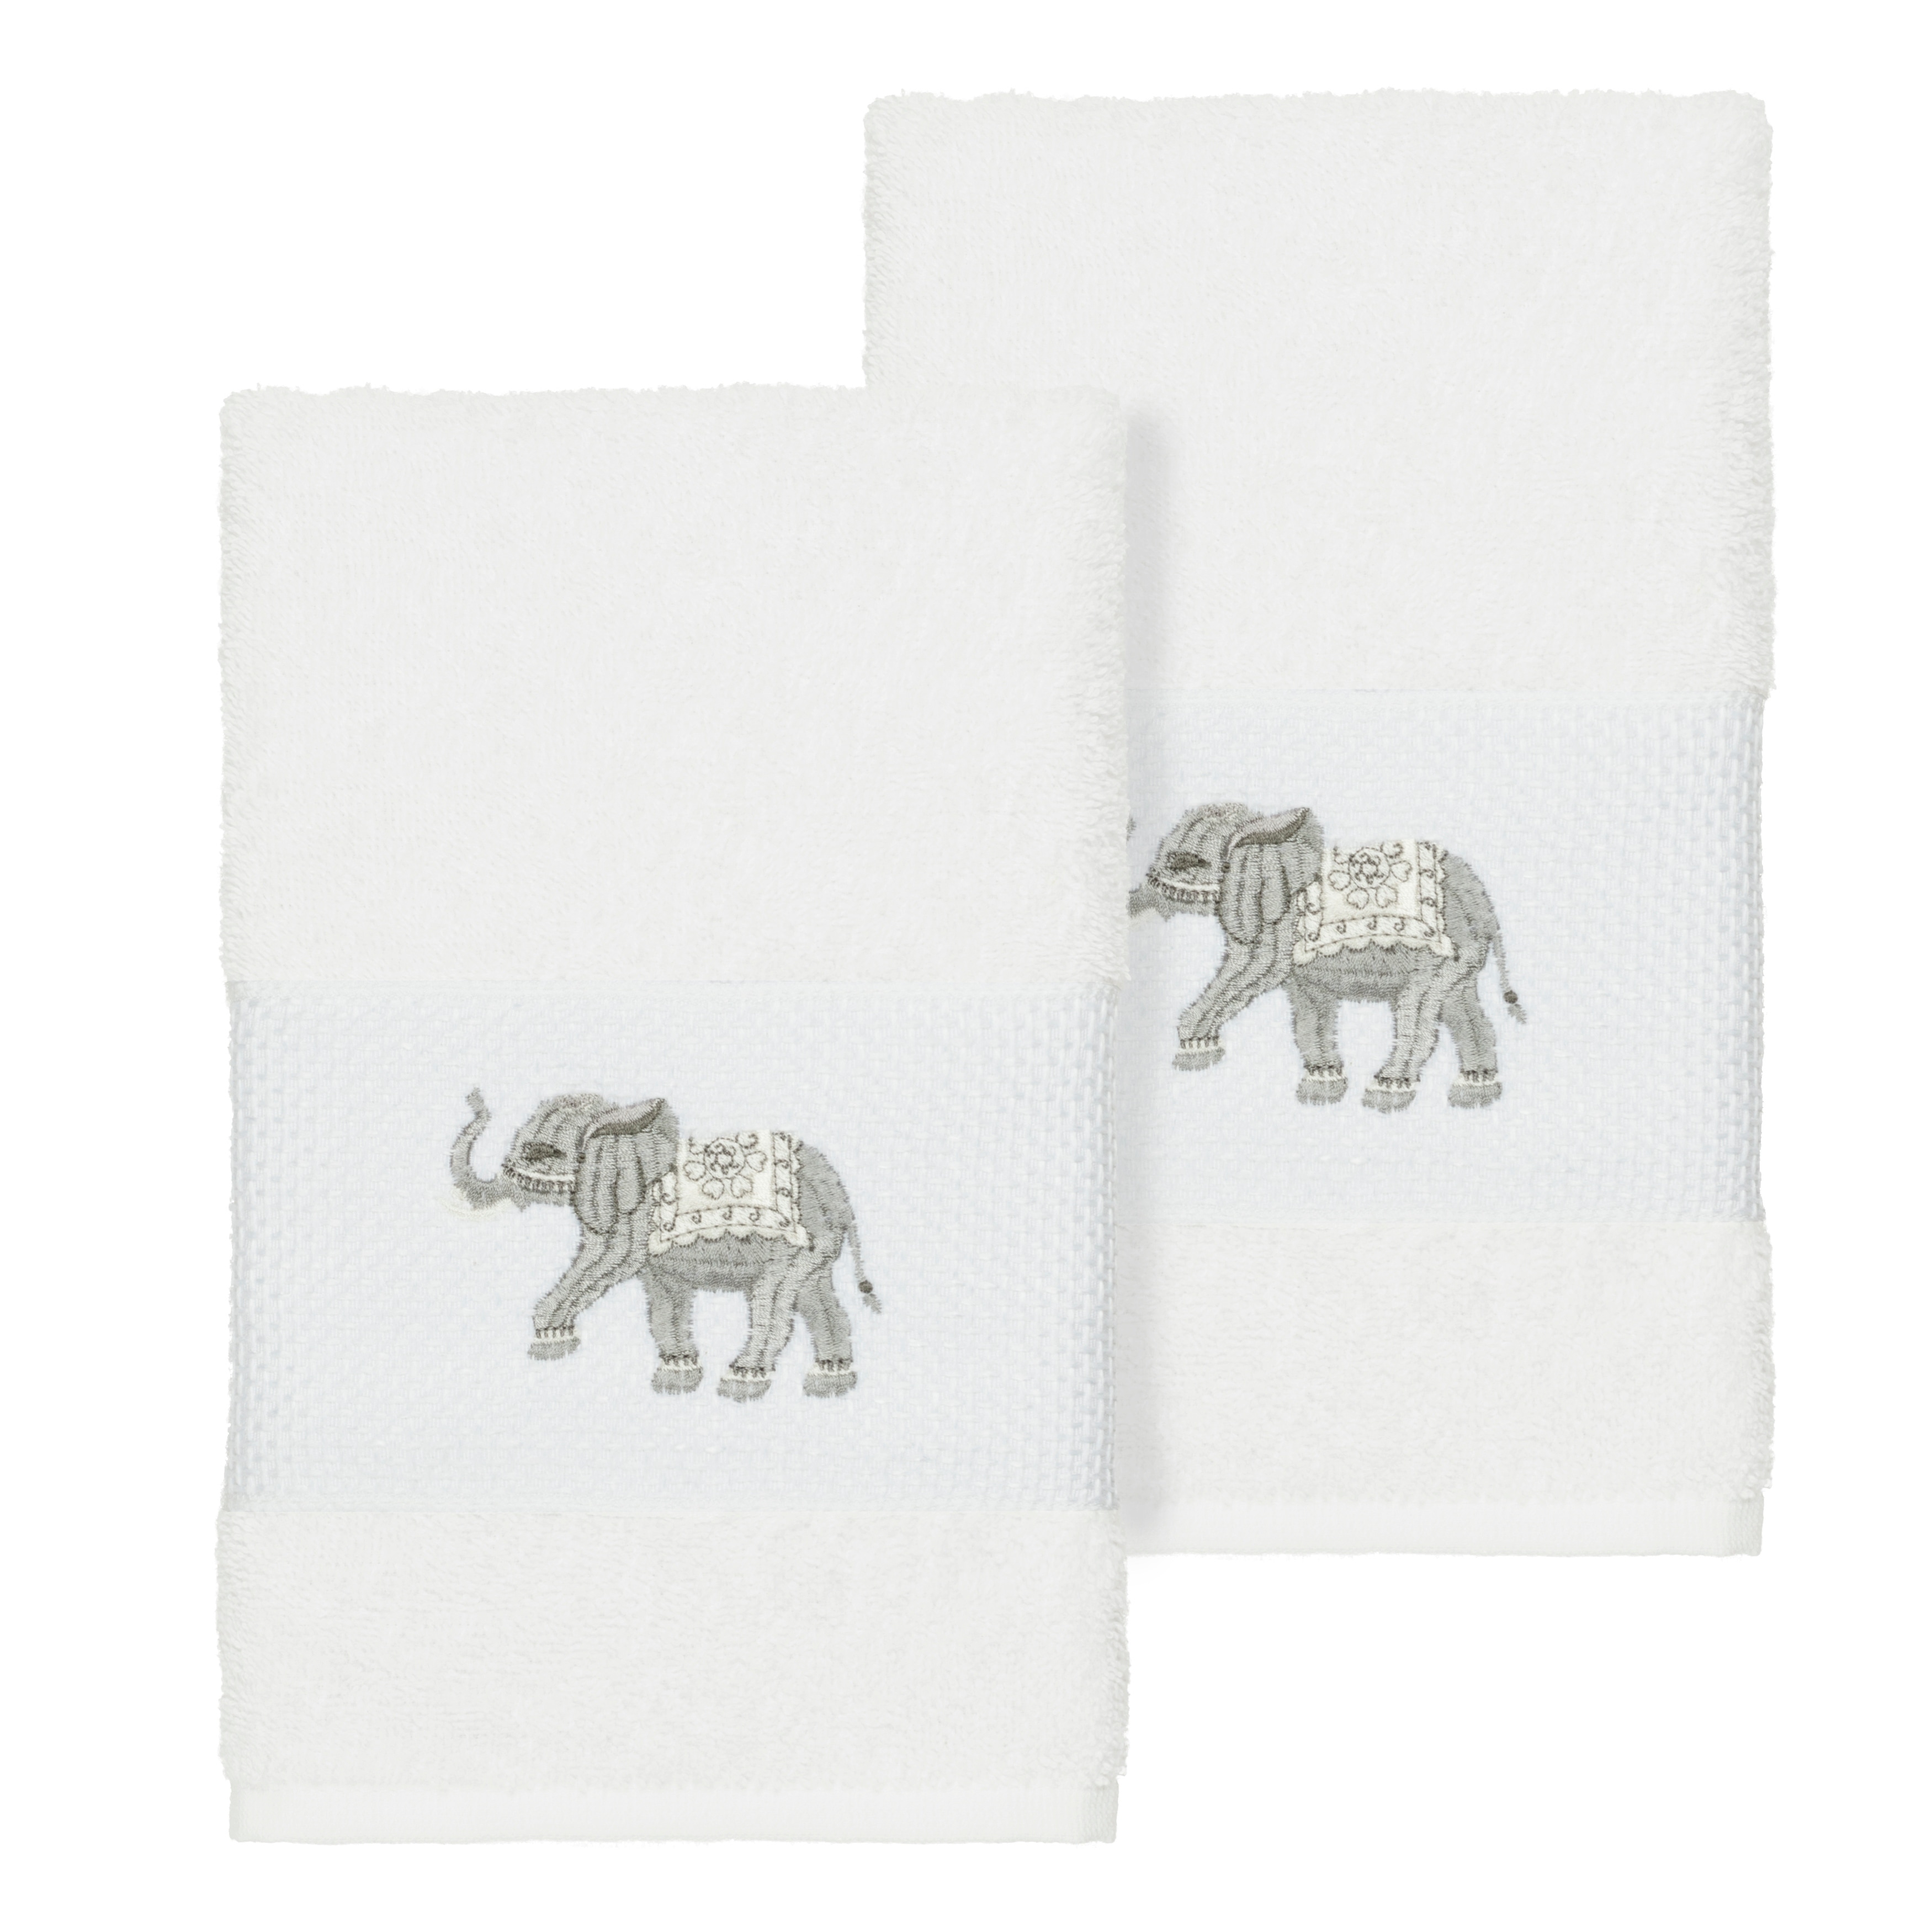 https://ak1.ostkcdn.com/images/products/21905178/Authentic-Hotel-and-Spa-Turkish-Cotton-Elephants-Embroidered-White-2-piece-Towel-Hand-Set-d45e8c31-358f-434a-8a91-60b68ae88198.jpg